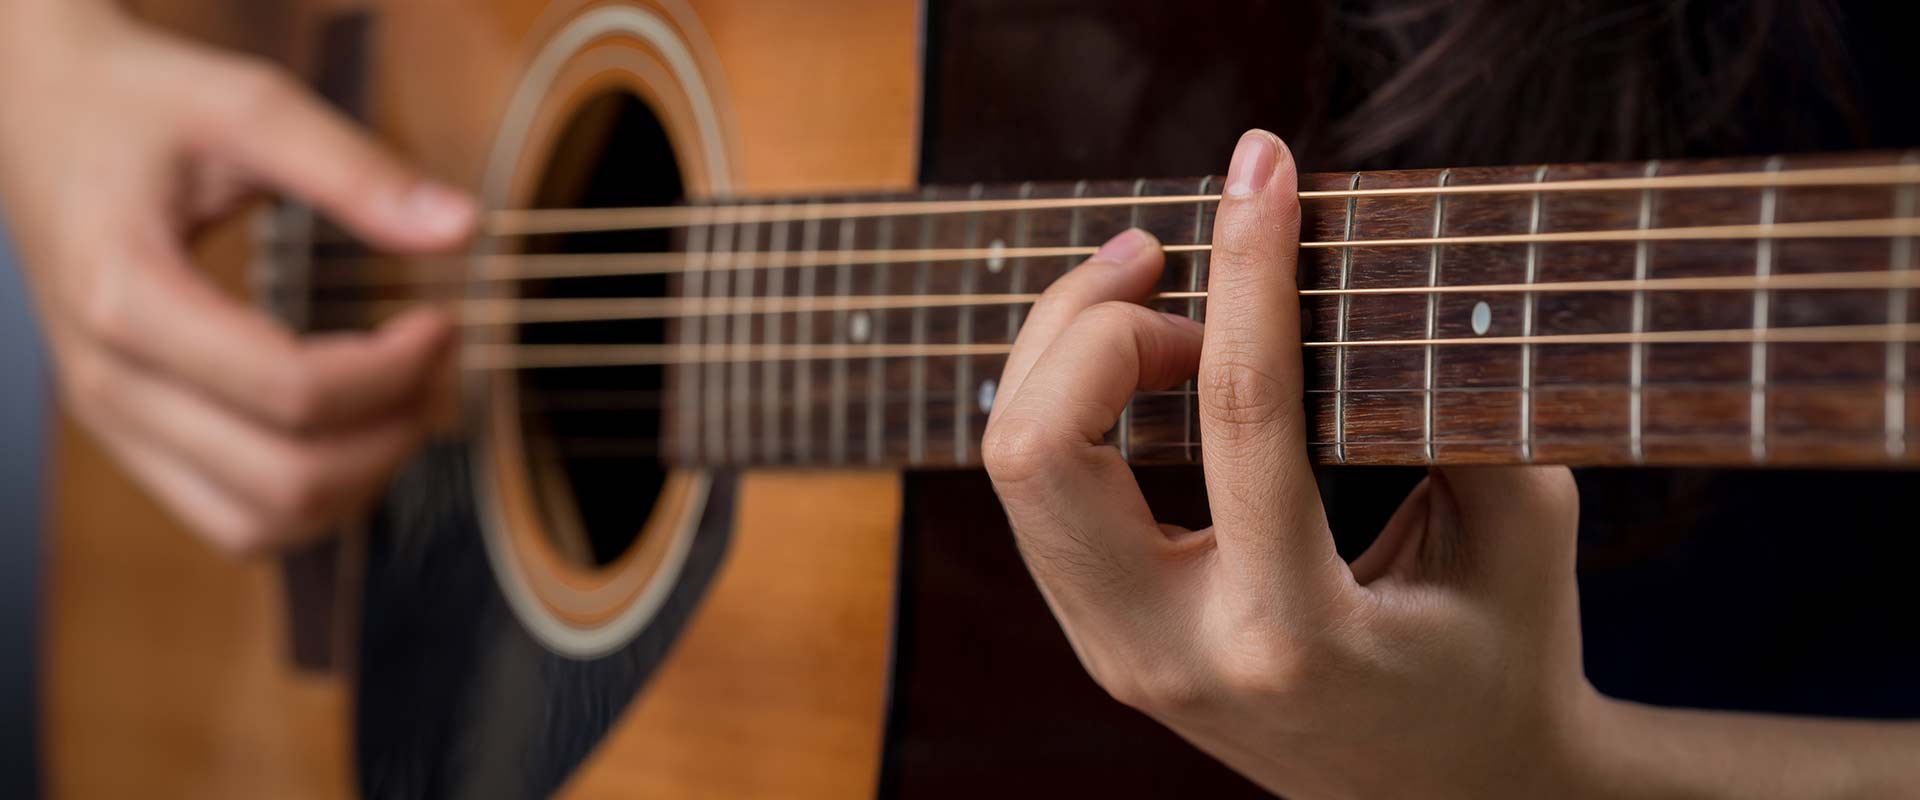 playing guitar with cut fingers